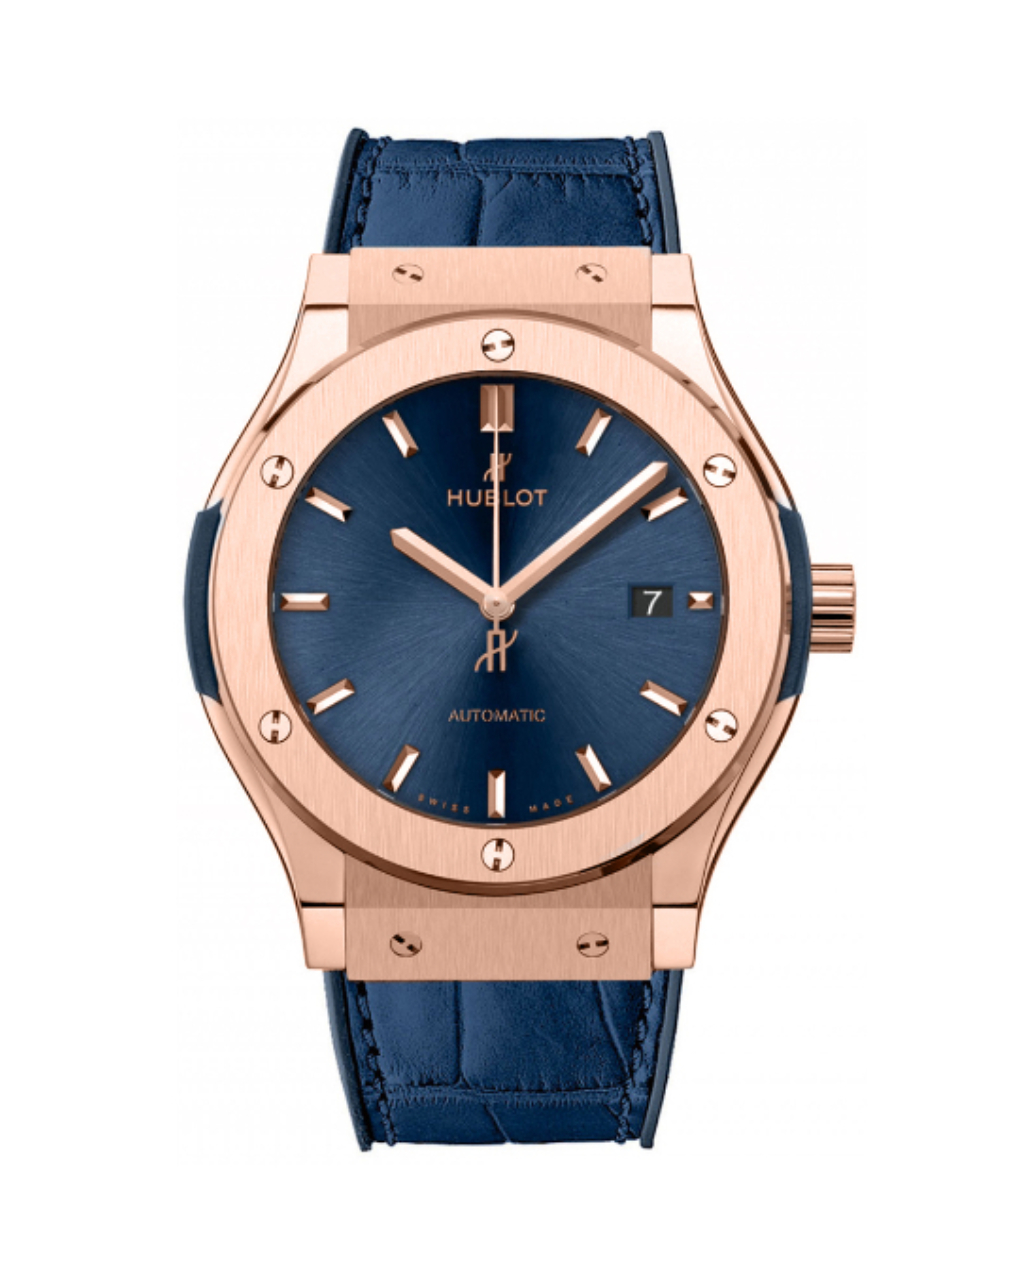 Classic Fusion King Gold Blue 42mm 542.OX.7180.LR